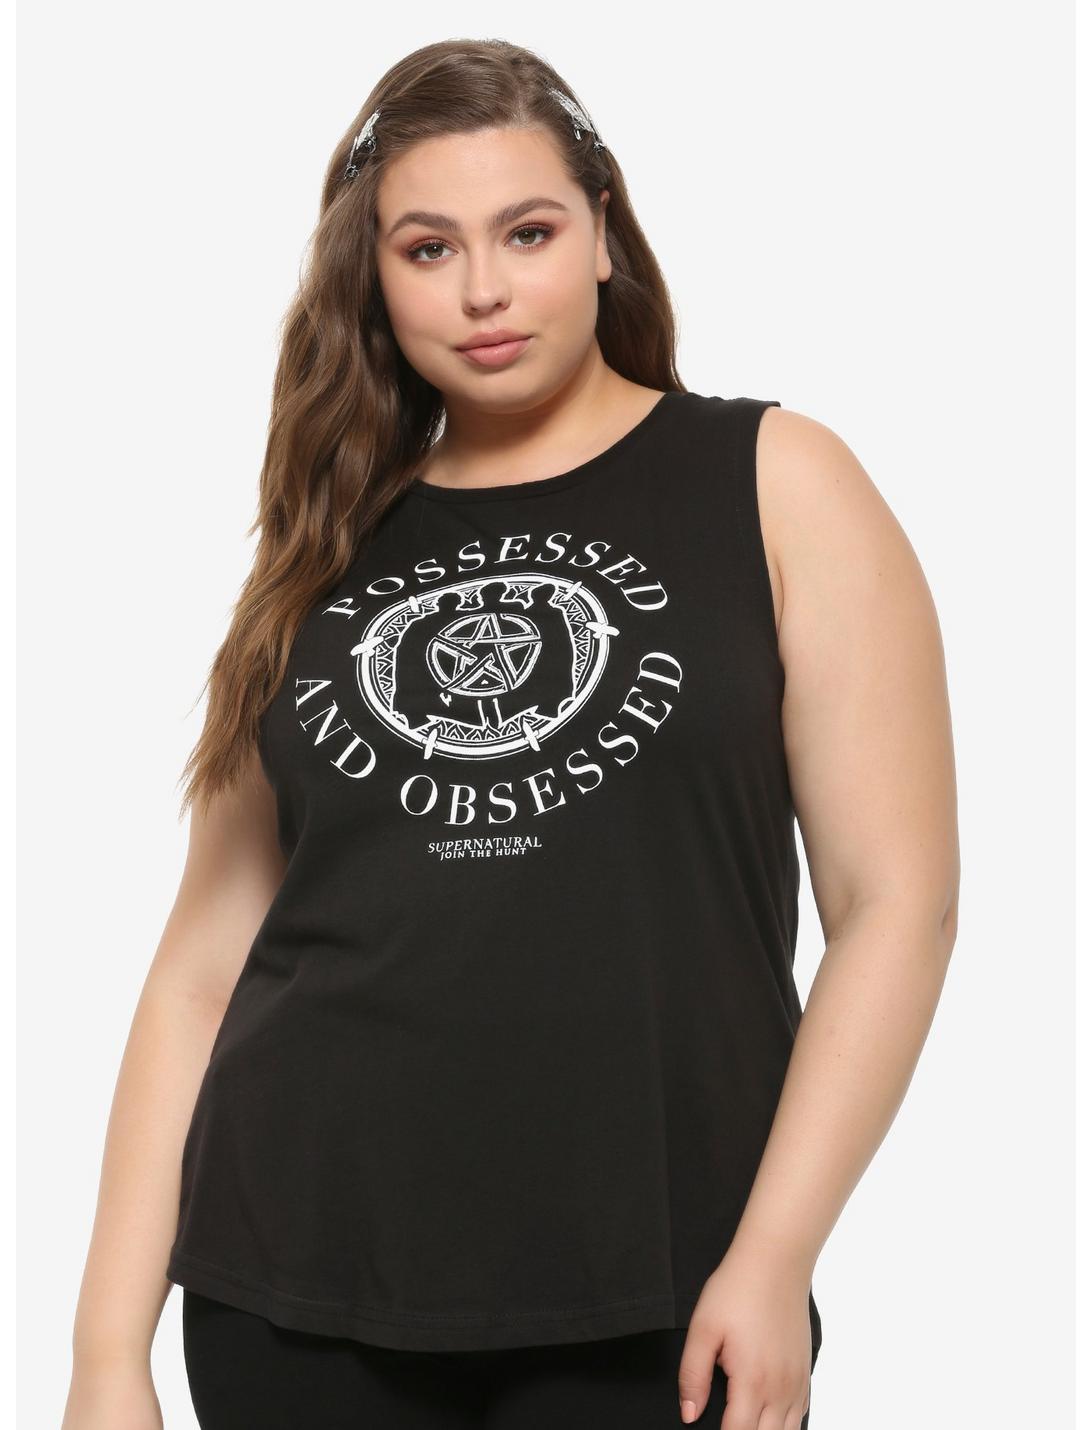 Supernatural Possessed And Obsessed Girls Muscle Top Plus Size, WHITE, hi-res